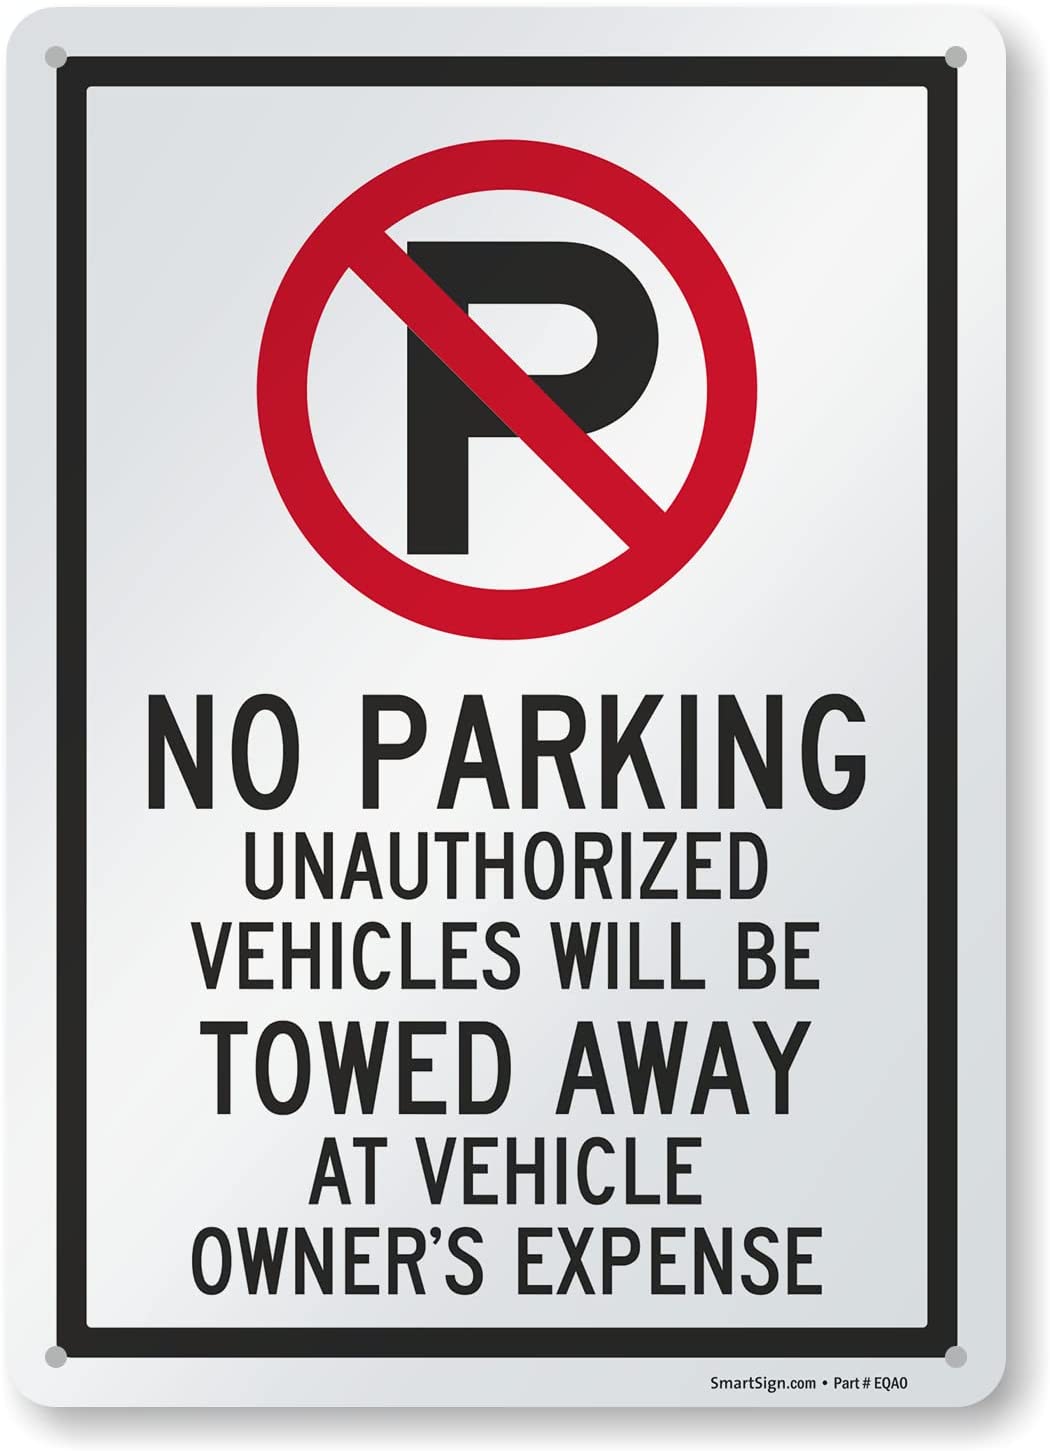 “No Parking - Unauthorized Vehicles Towed Away At Vehicle Owner's Expense” Metal Sign - "14 x 10" - Each